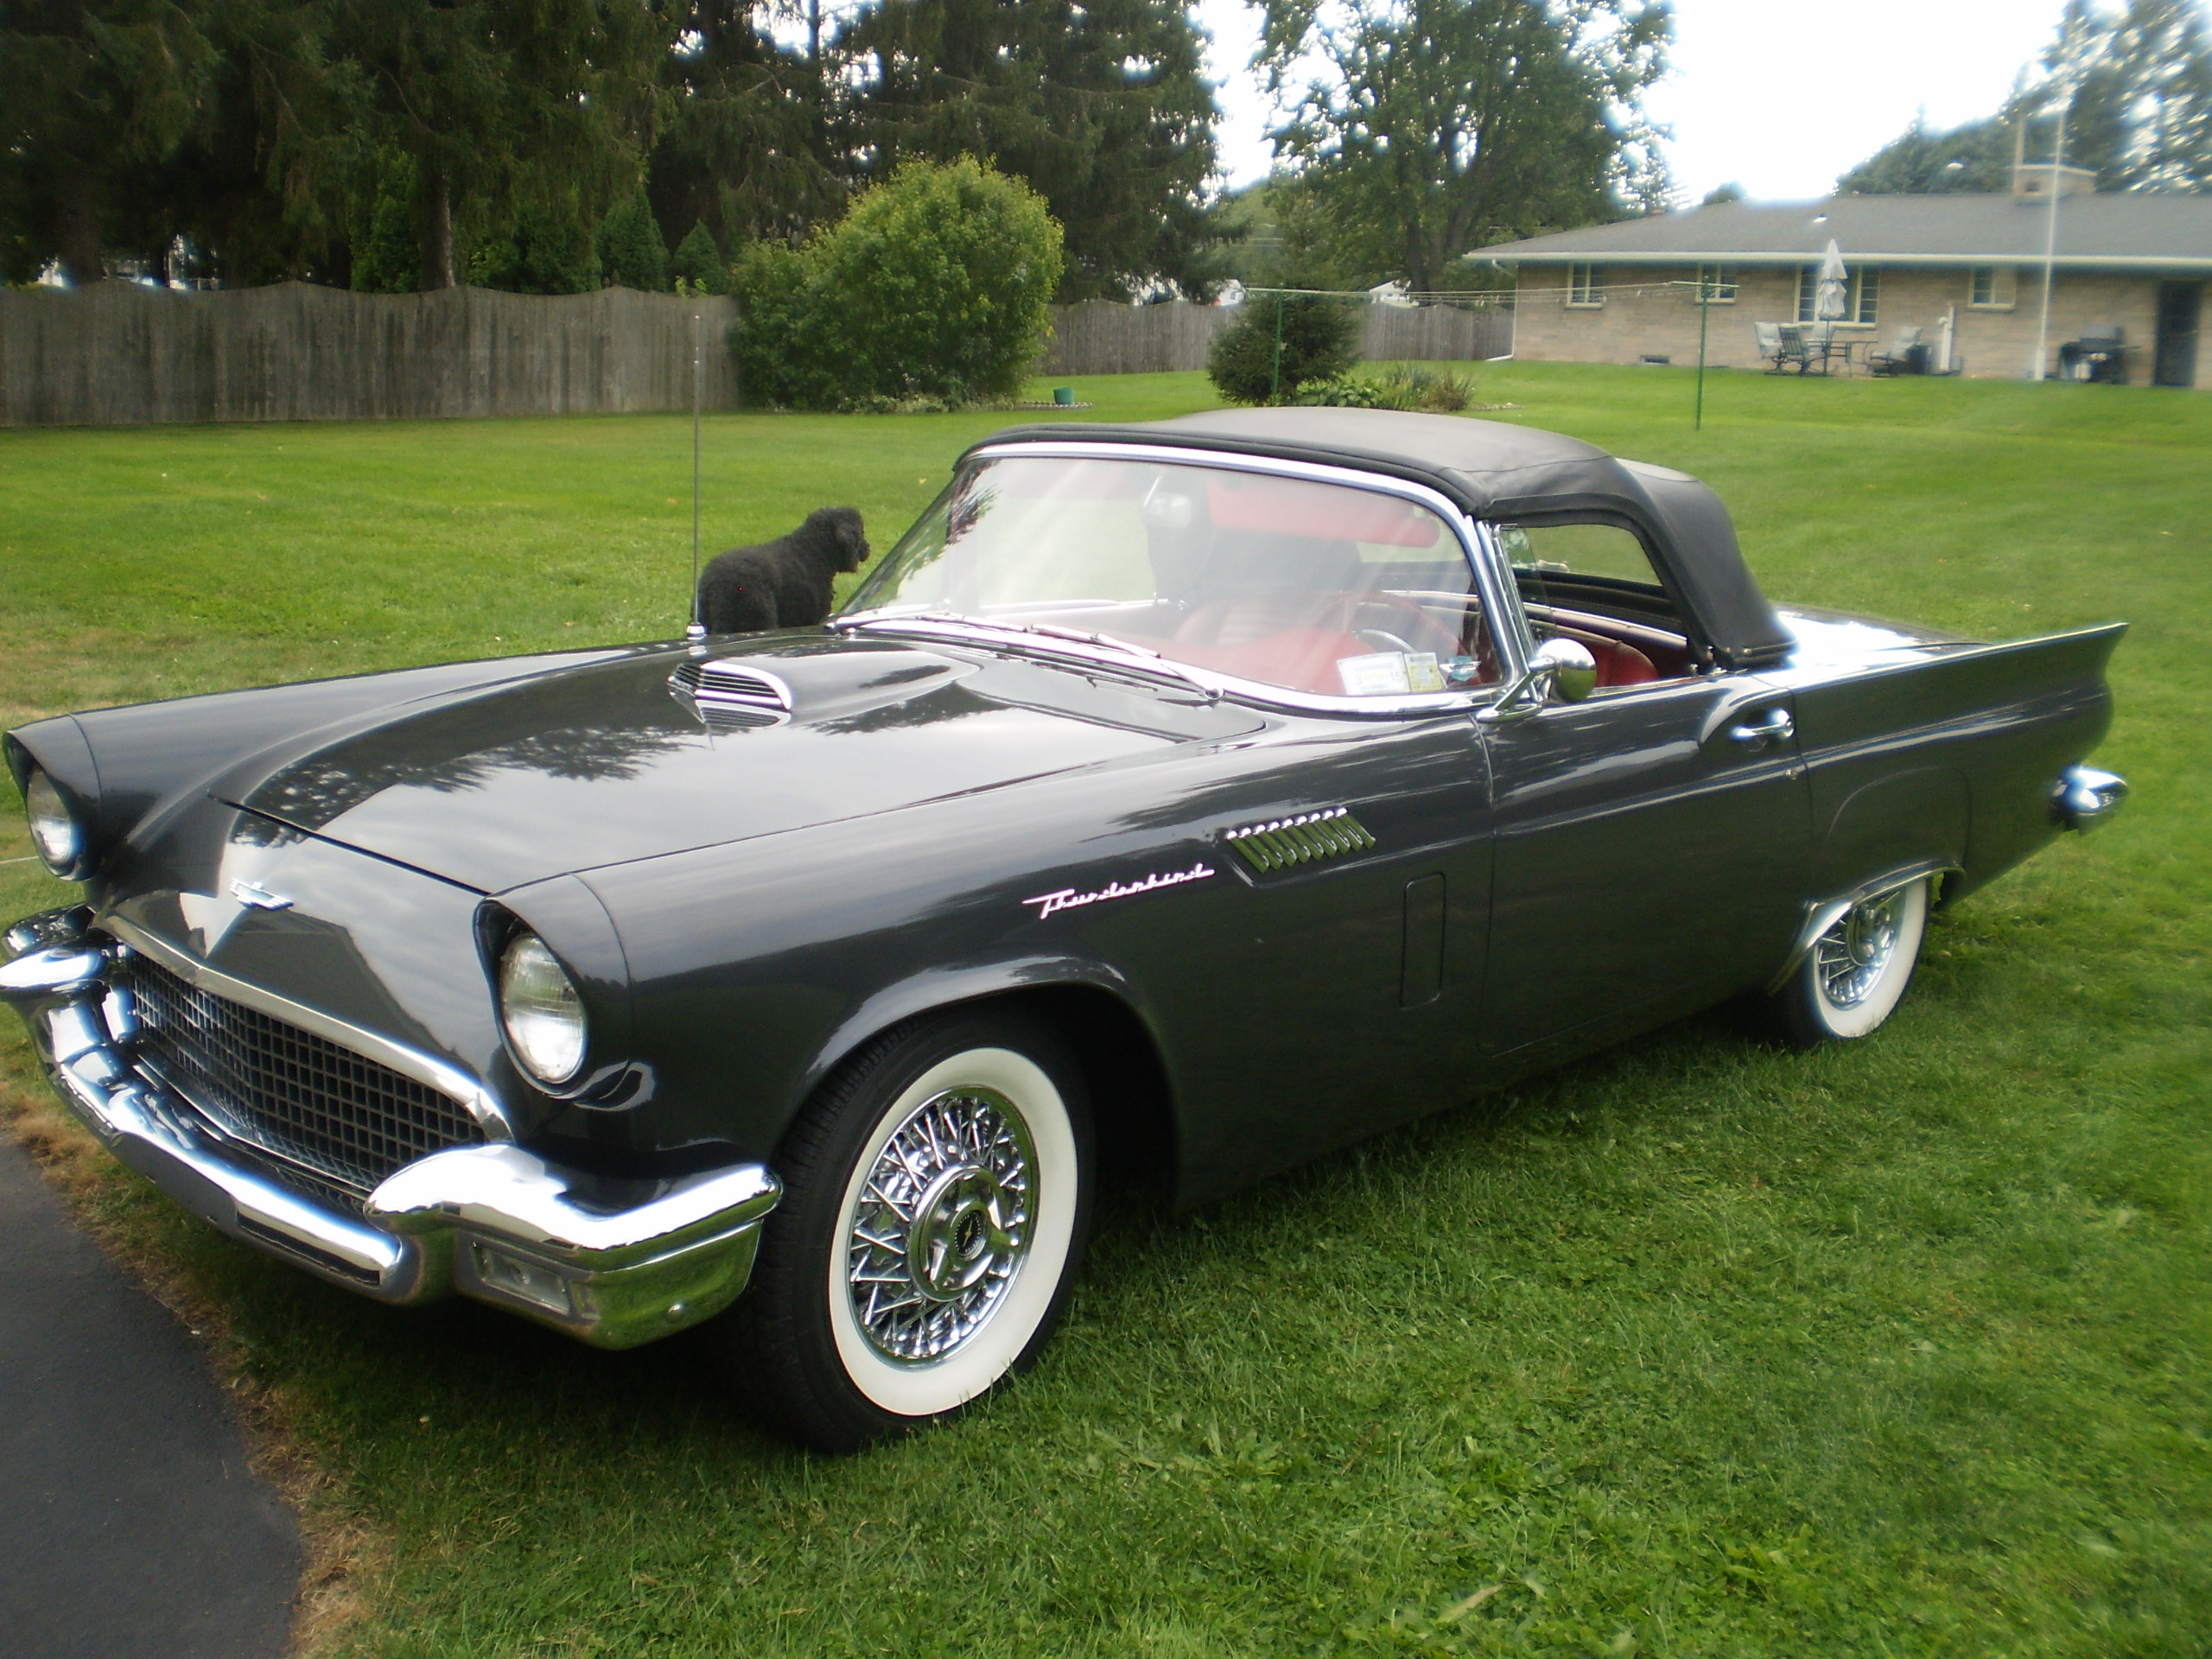 Ford Thunderbird Photo of the week